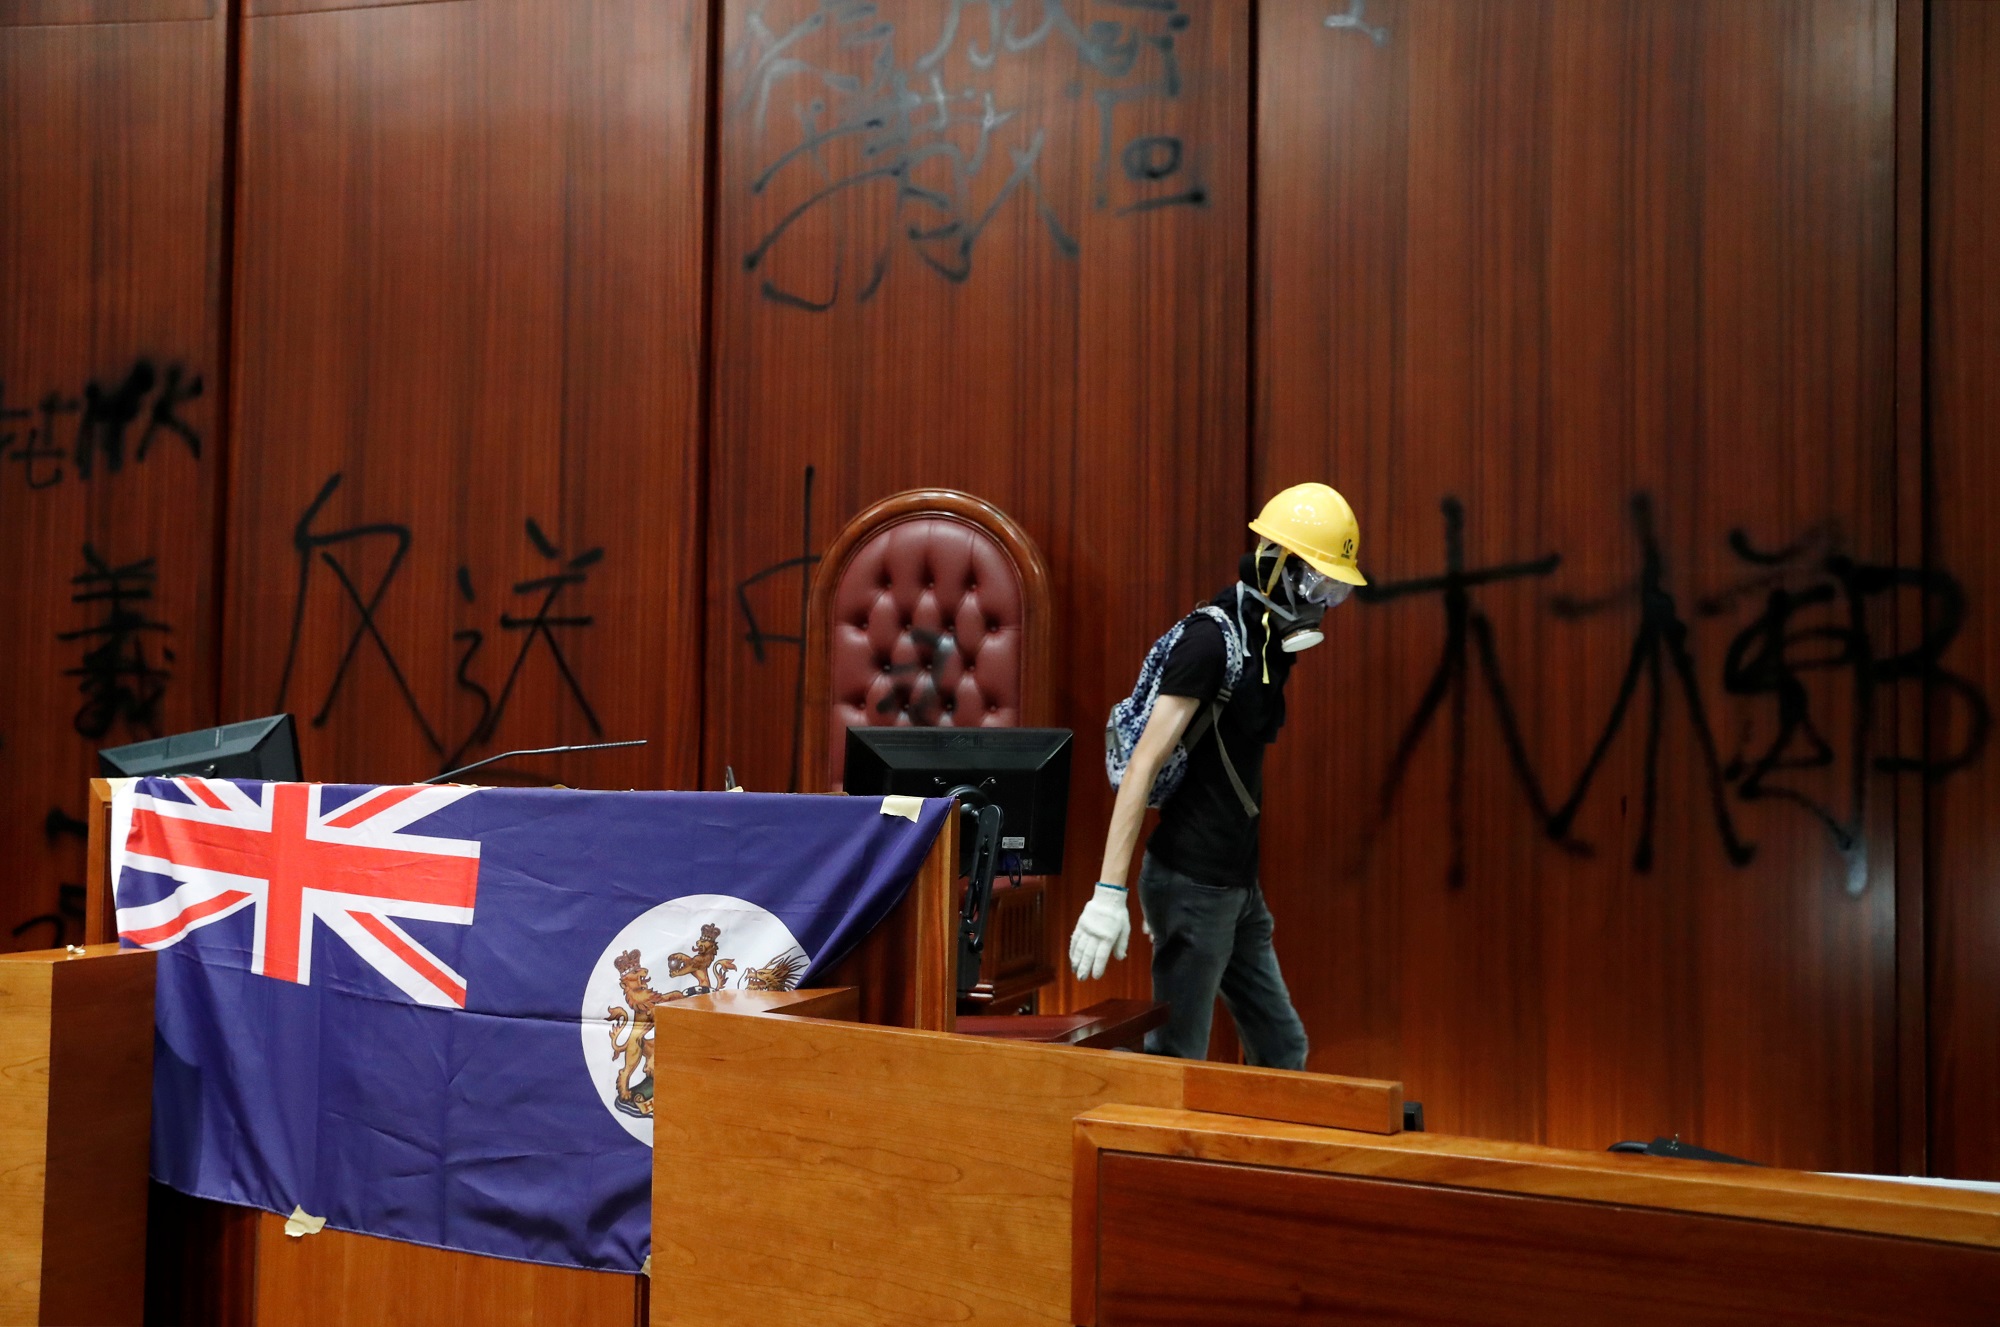 Colonial flag of Hong Kong is displayed inside a chamber after protesters broke into the Legislative Council building during the anniversary of Hong Kong's handover to China in Hong Kong, China July 1, 2019. REUTERS/Tyrone Siu